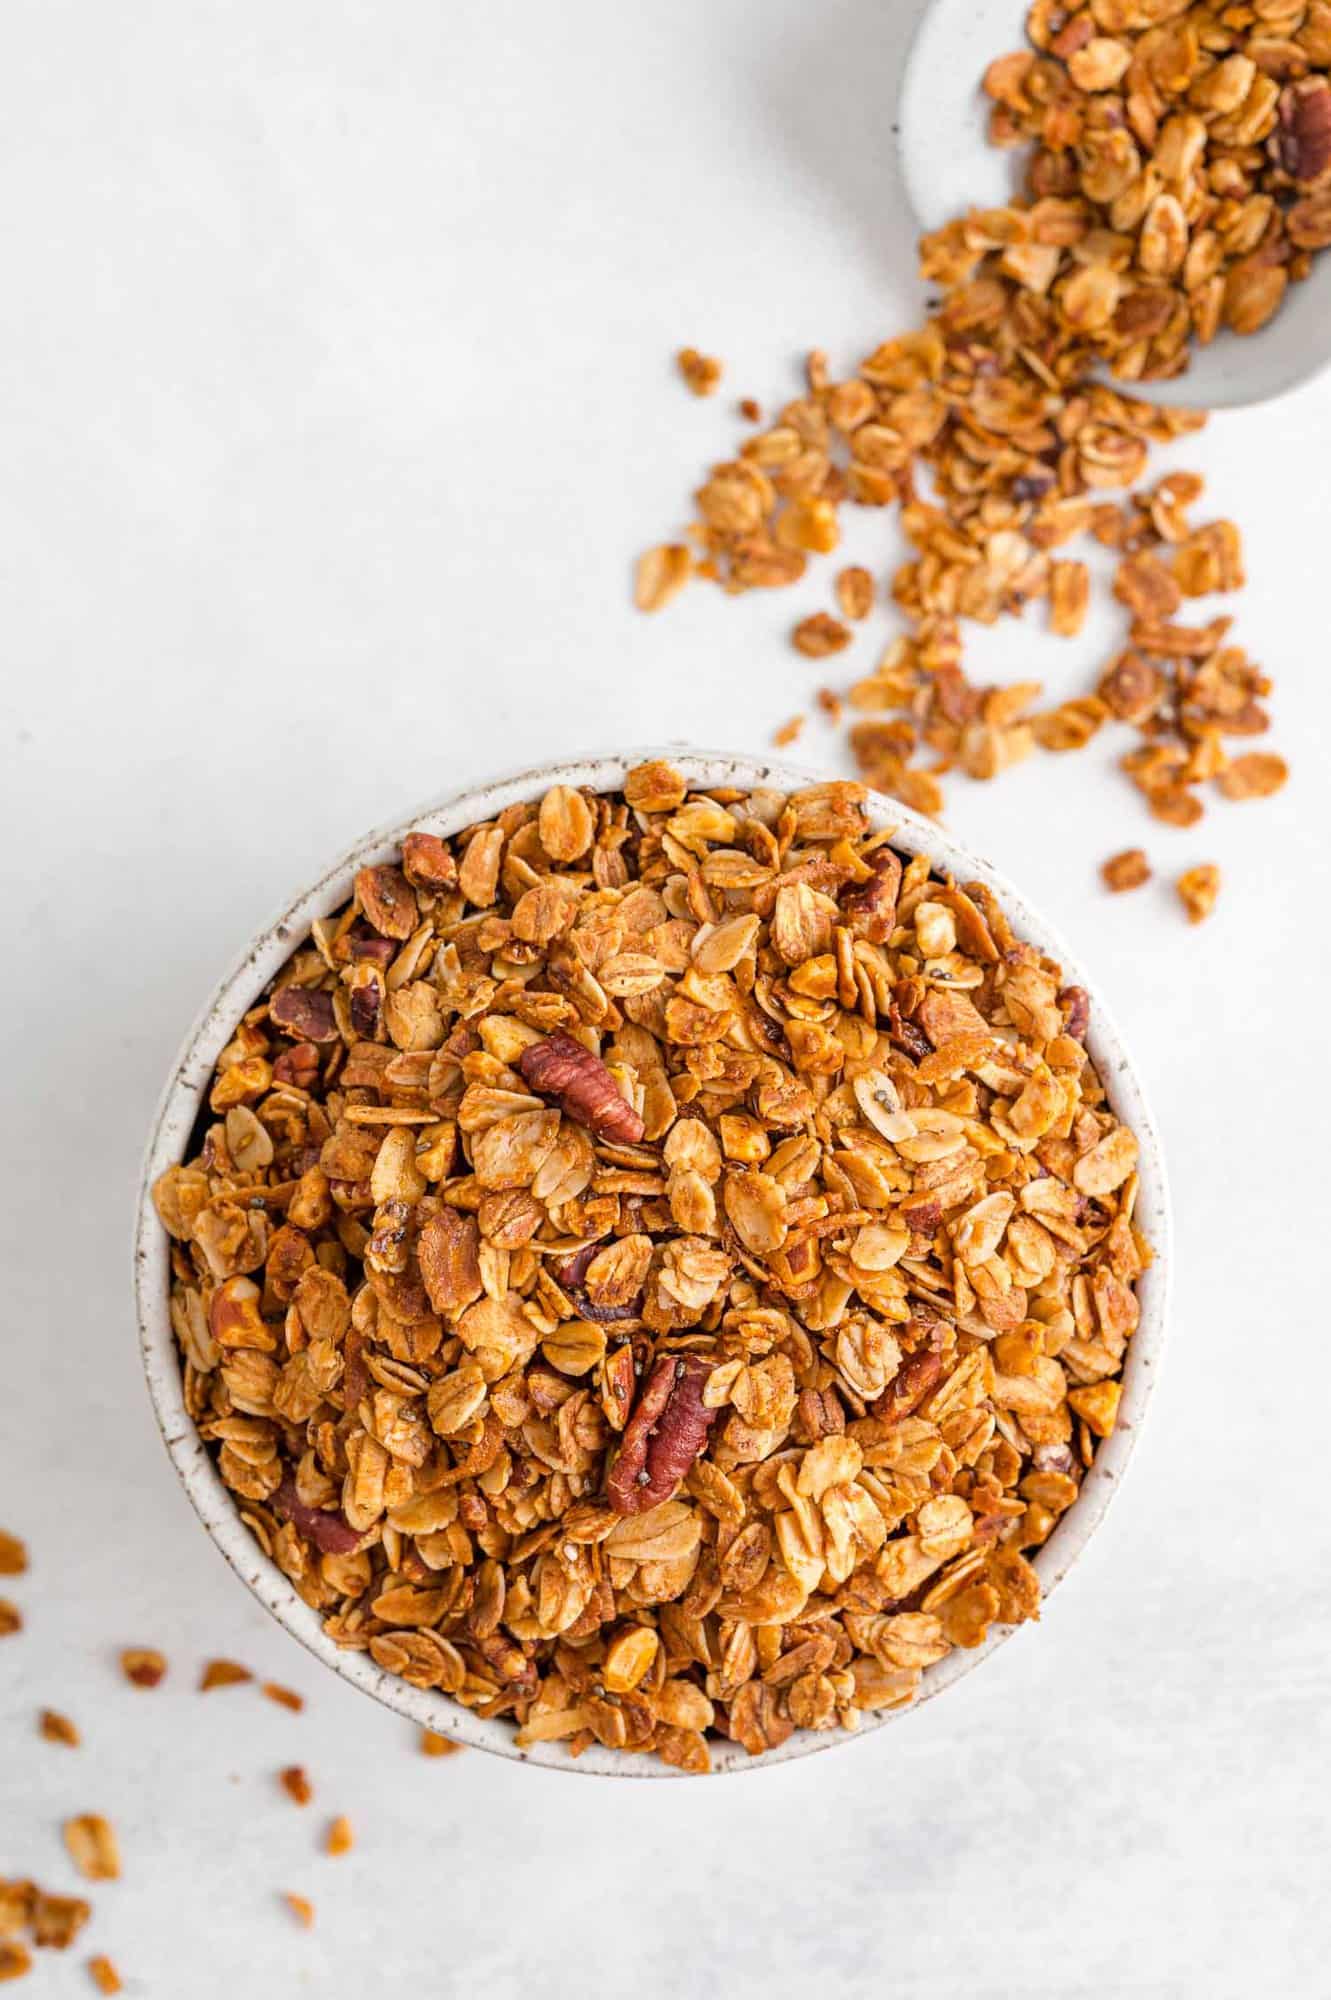 Granola in a bowl with more on white surface.